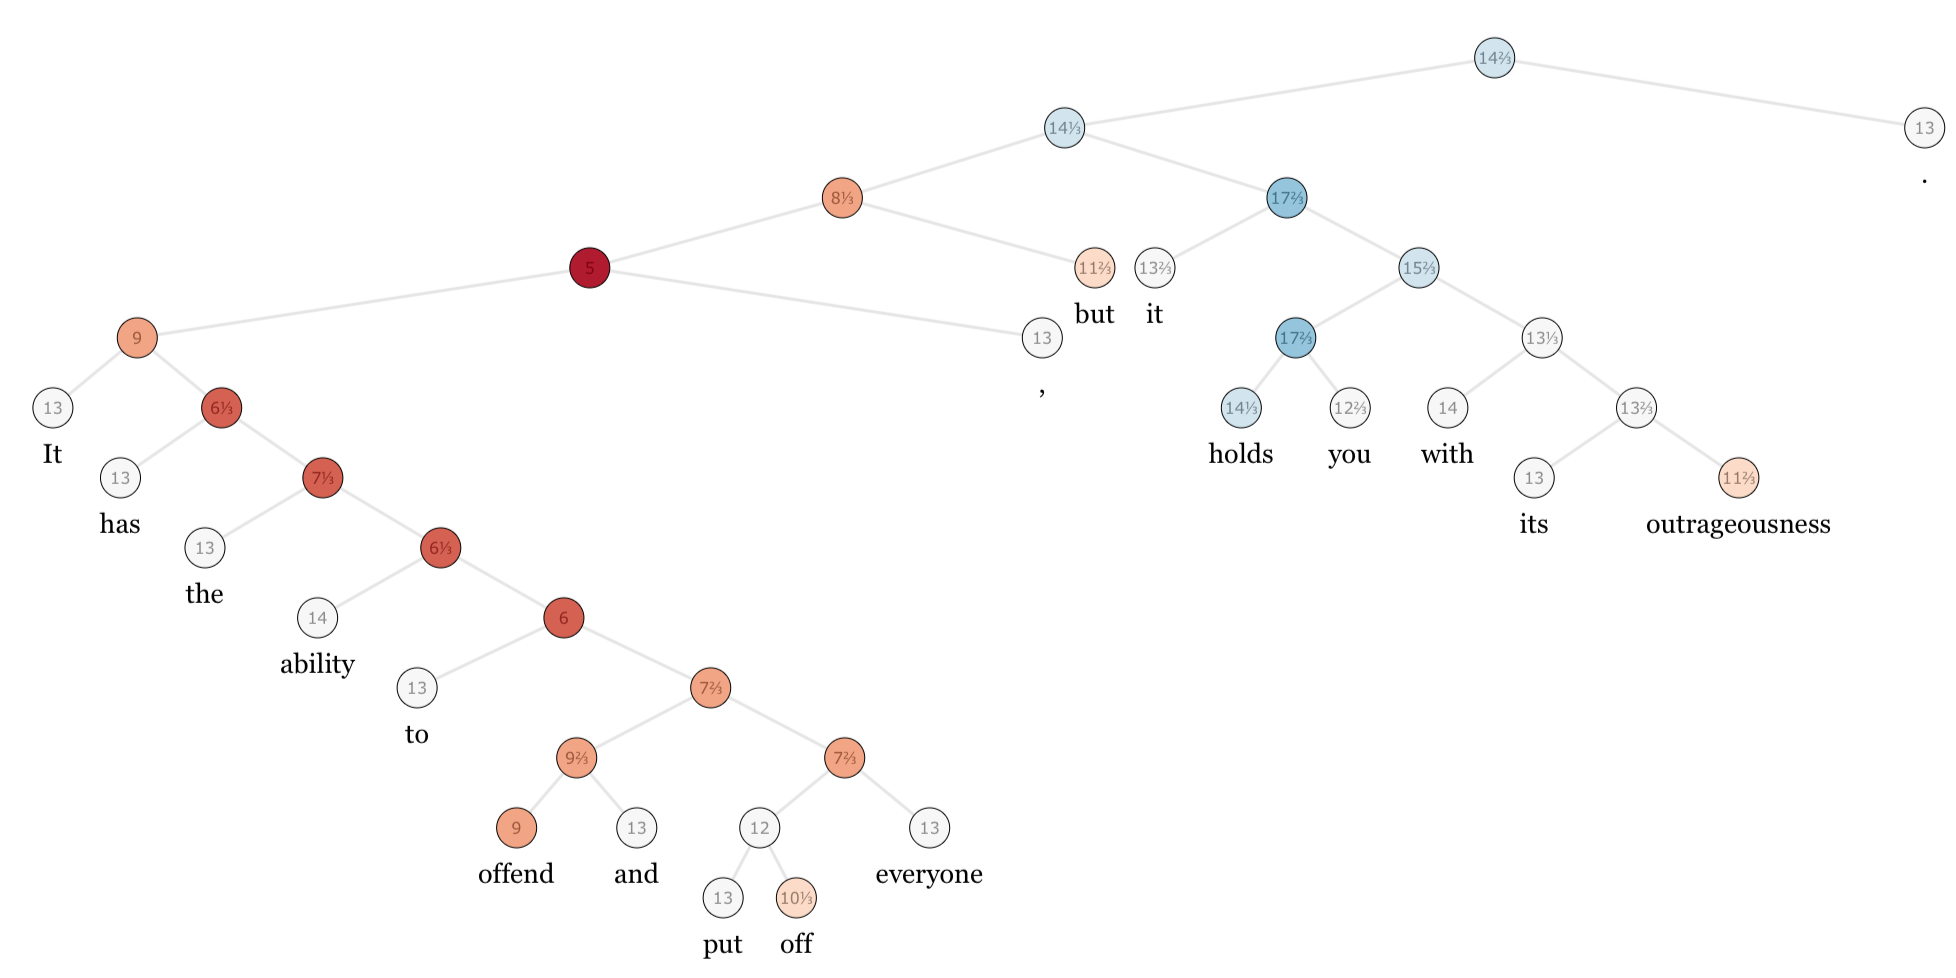 Example from the Stanford Sentiment Treebank dataset [1]. Blue denotes positive sentiment, red is negative.